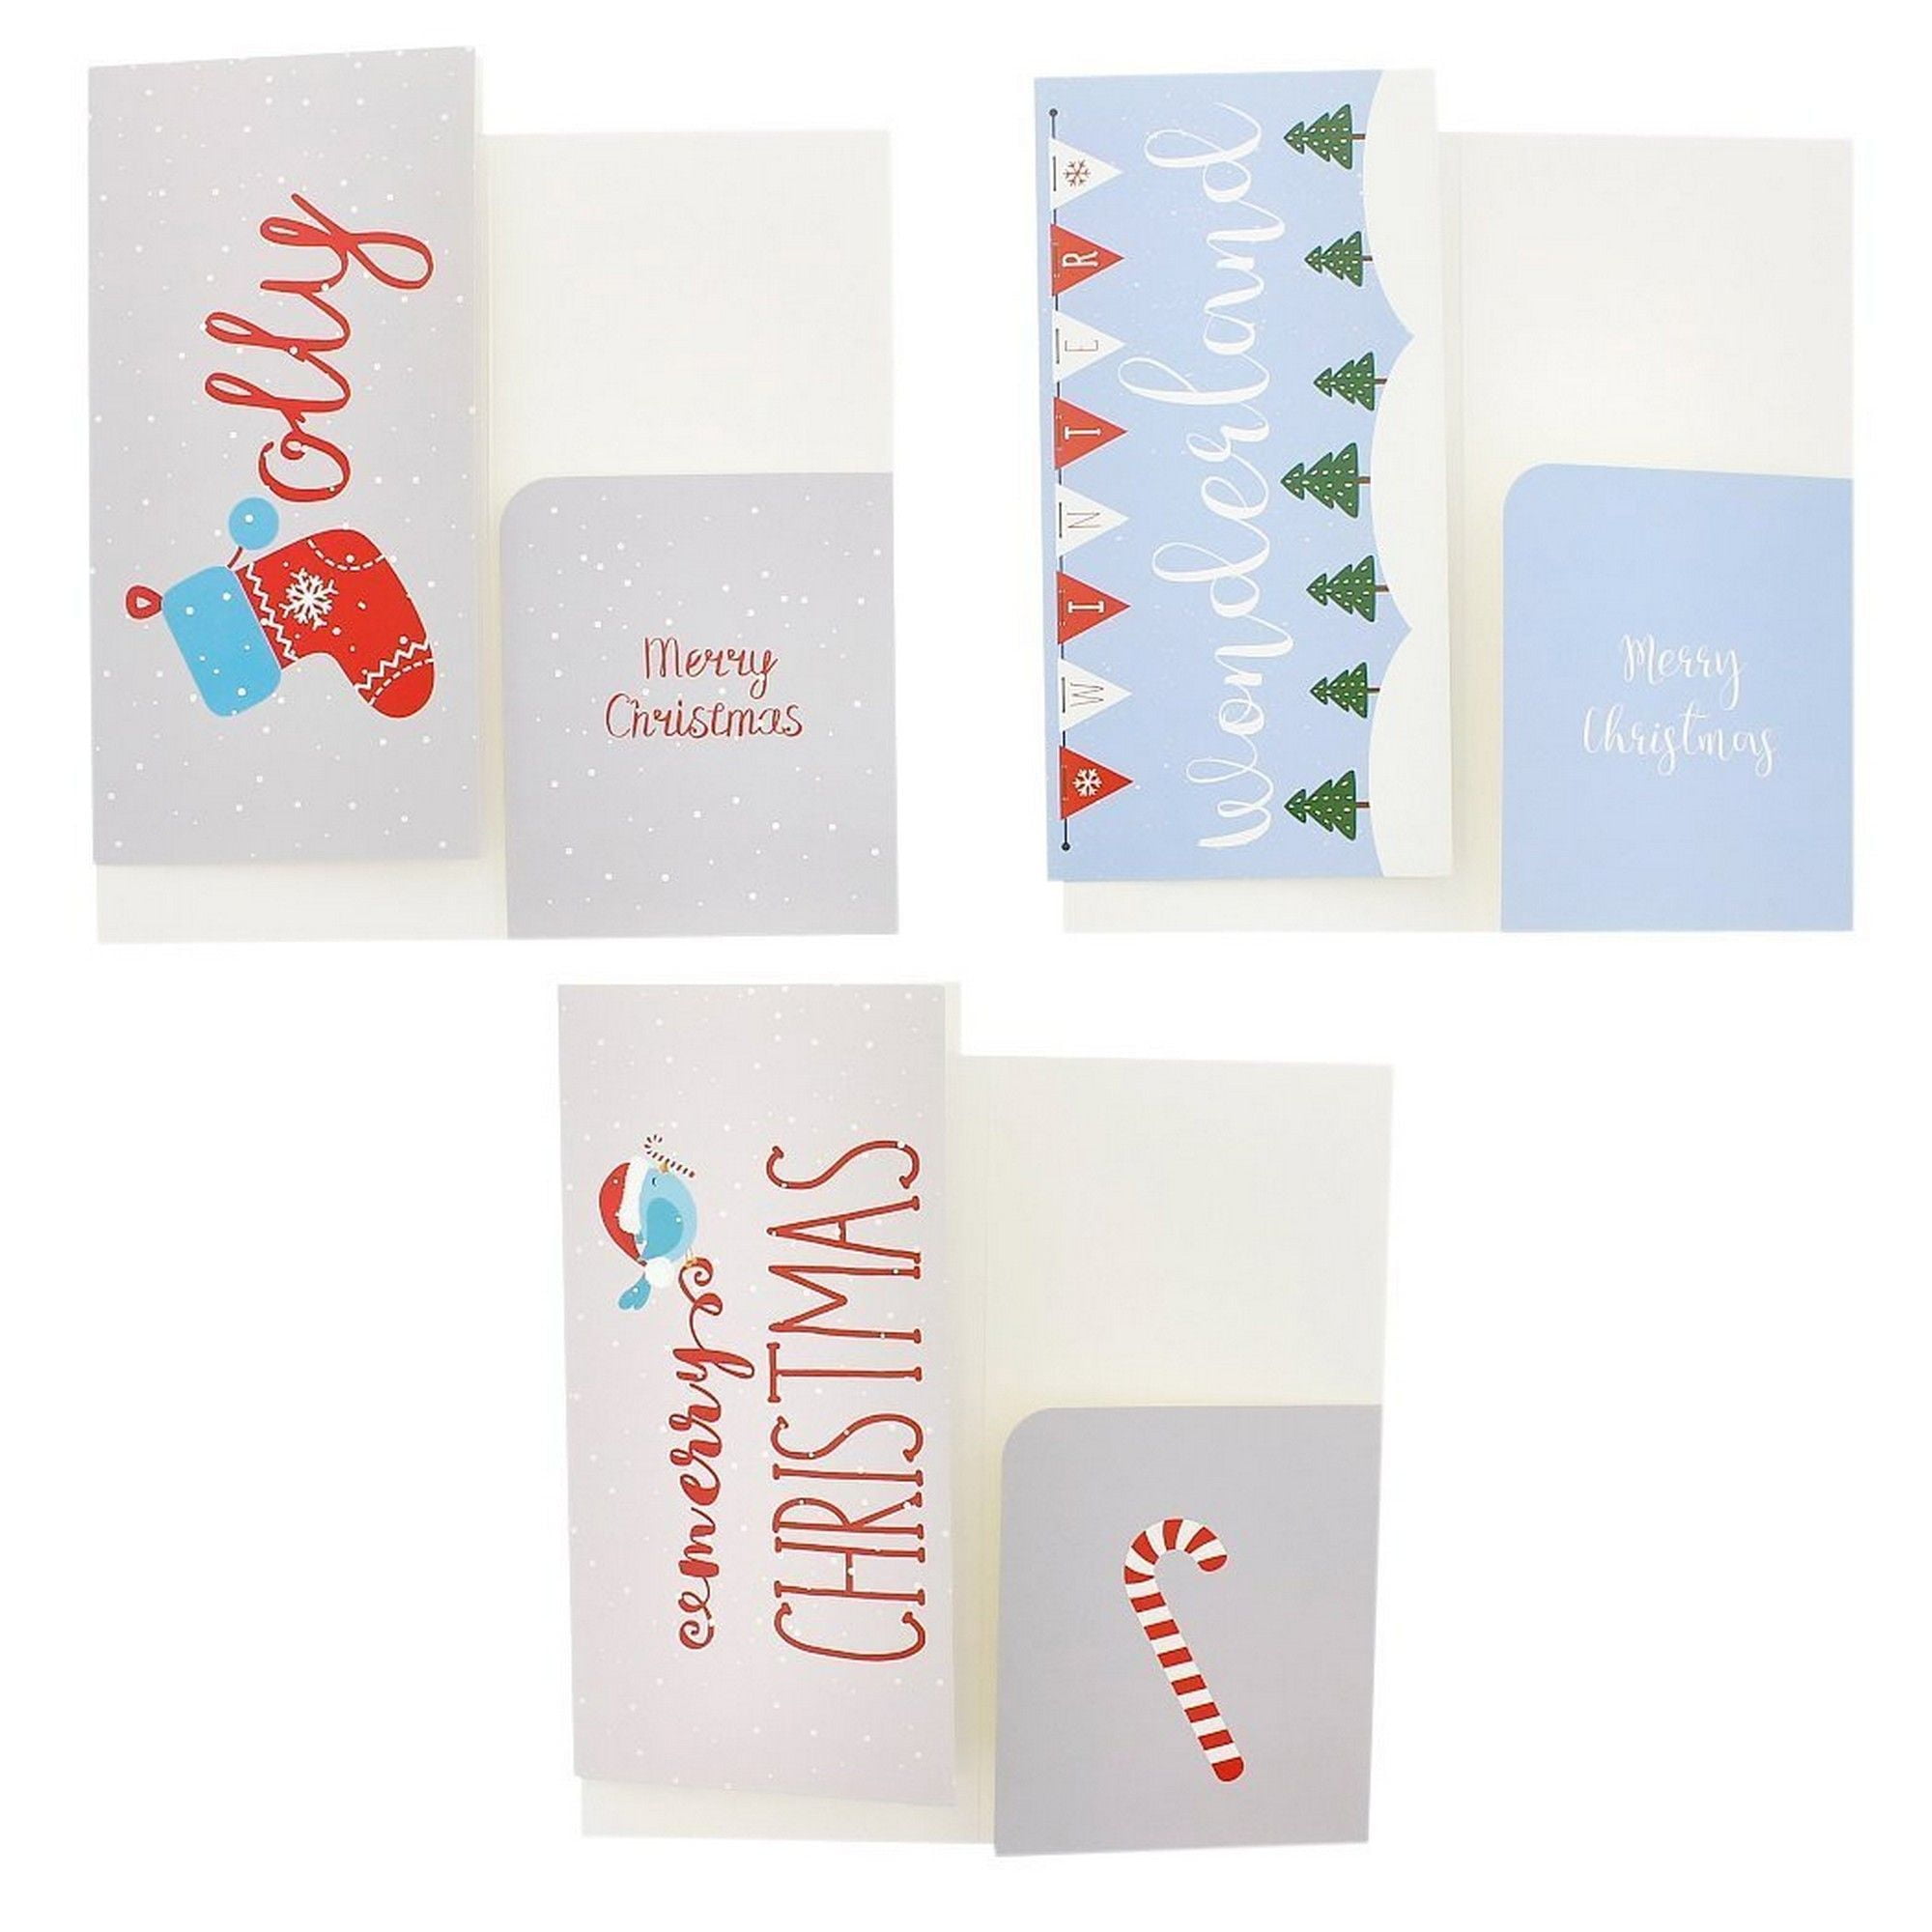 36 Pack Winter Holiday Money Christmas Greeting Cards Polar Bears 3.5 x 7.25 Inches 6 Winter Christmas Designs Including Ornaments Stockings Merry Christmas Envelopes Included Snowflakes